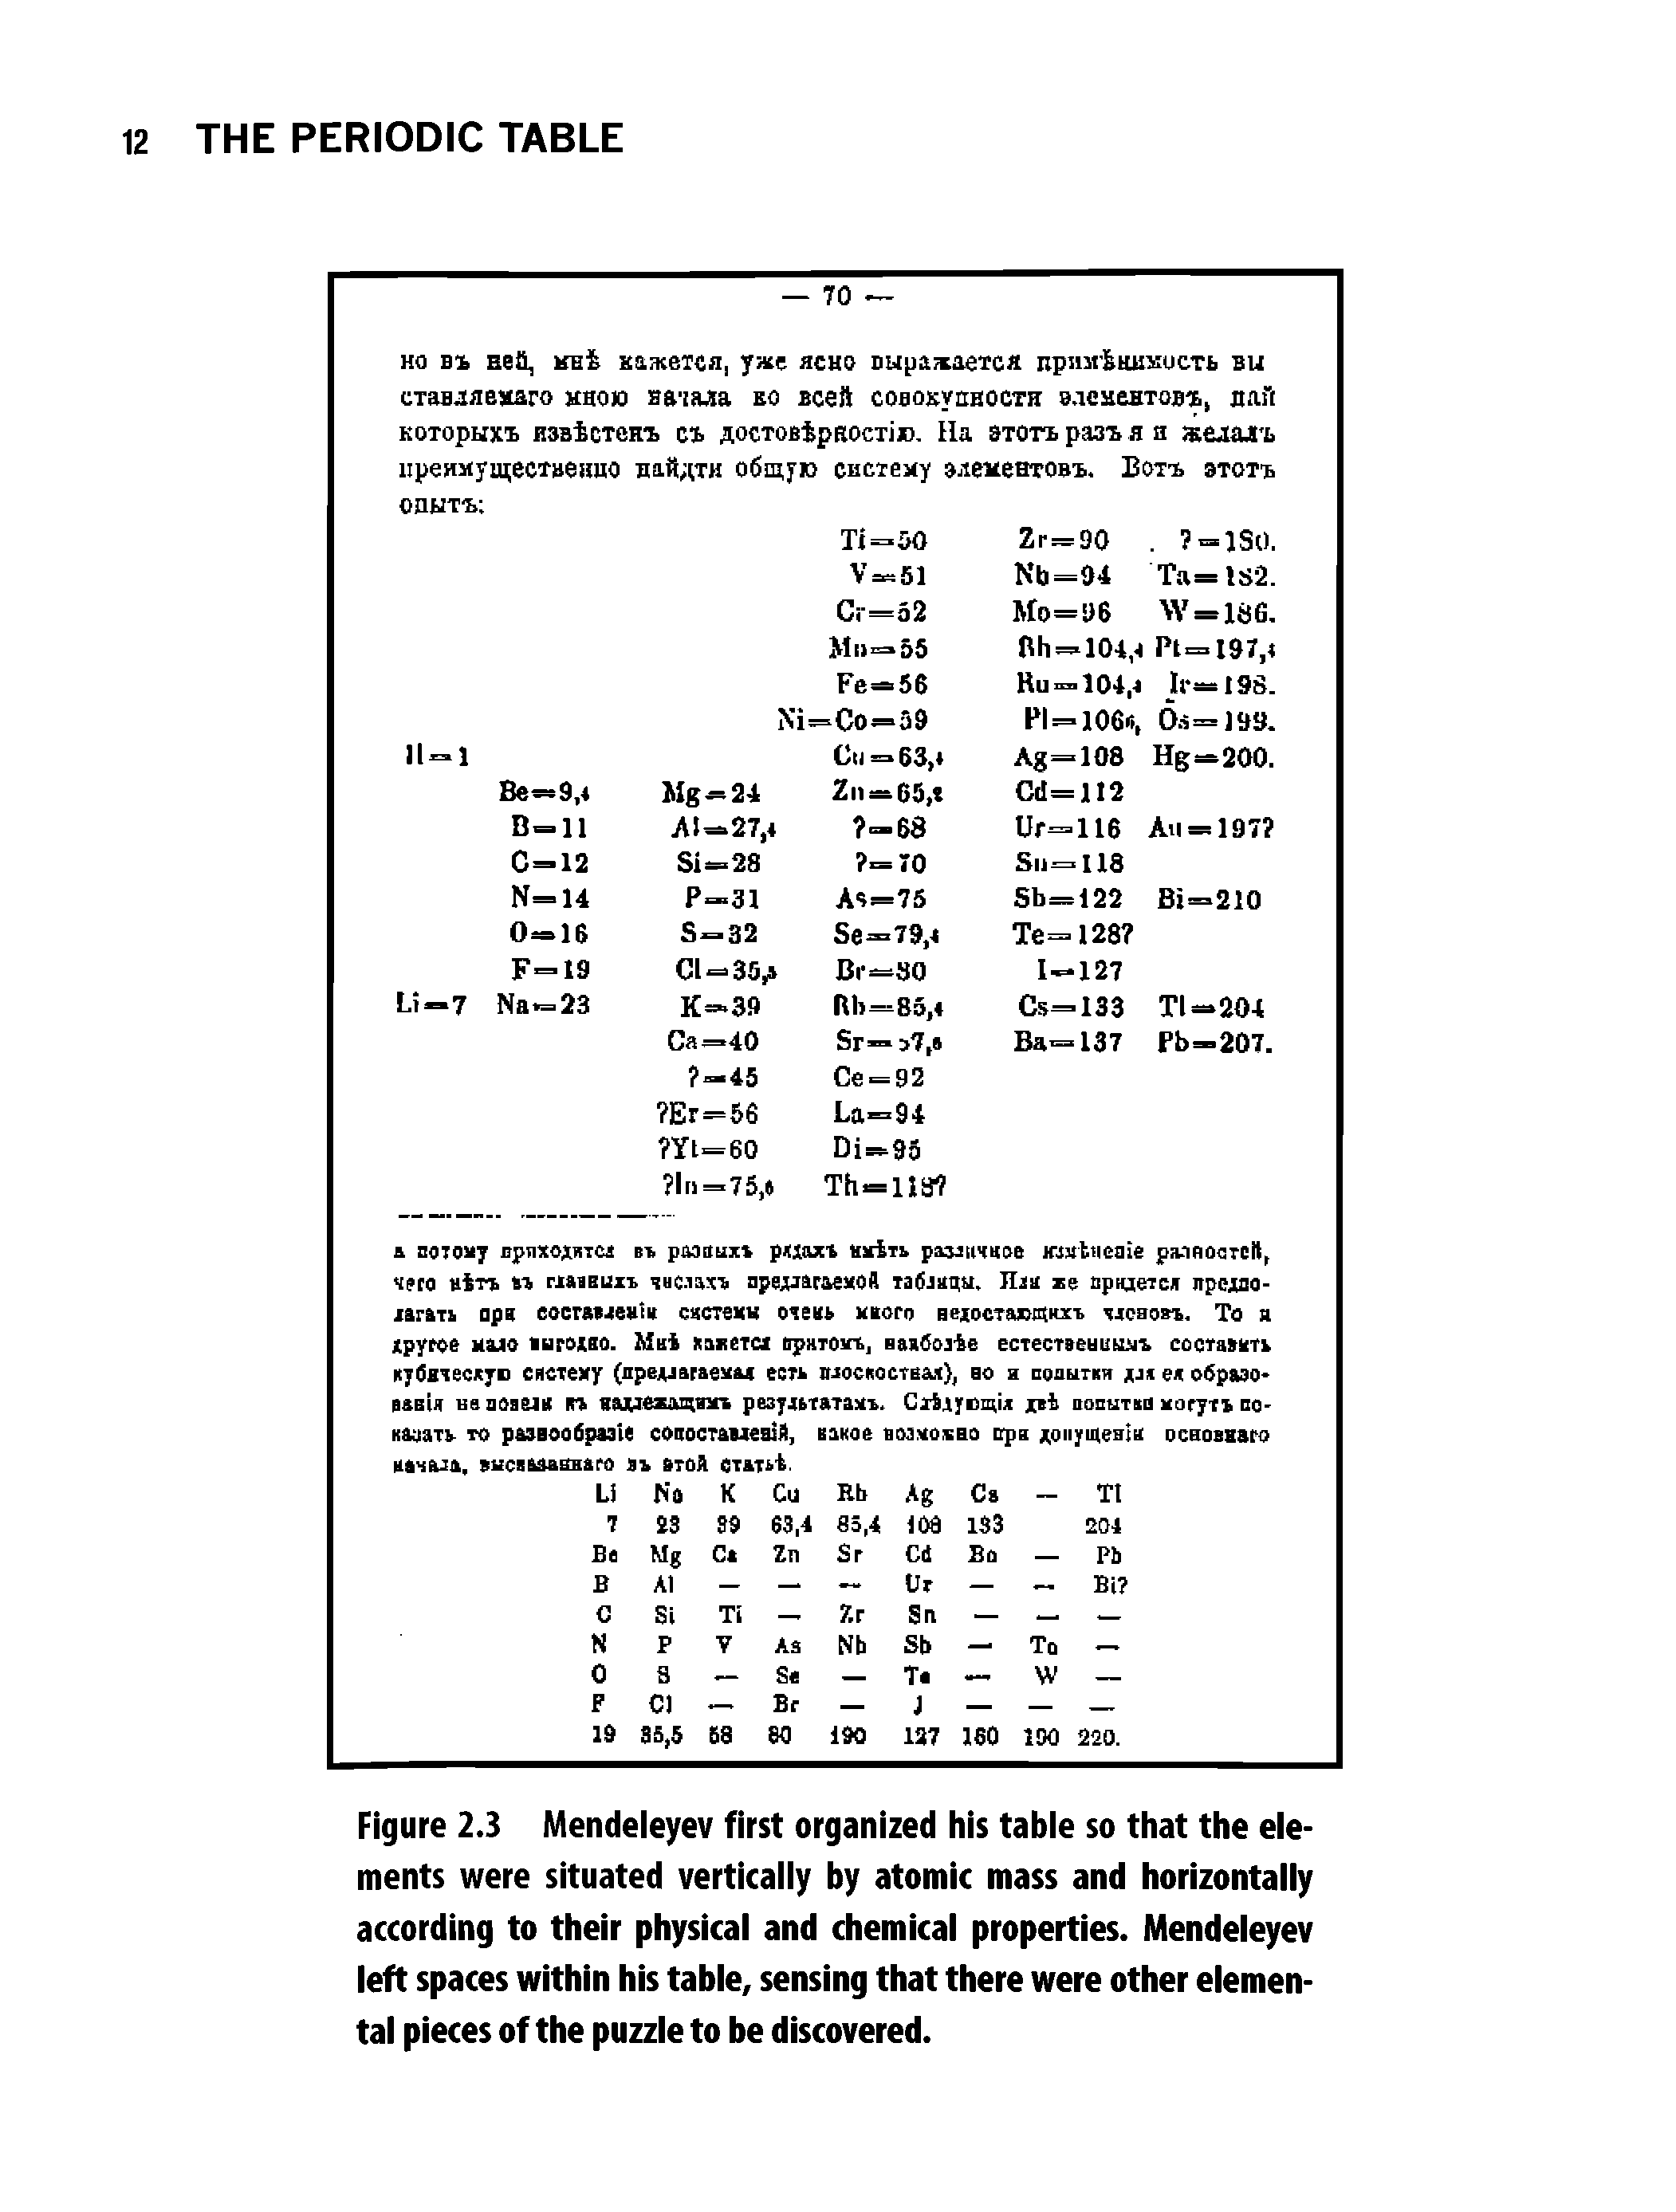 Figure 2.3 Mendeleyev first organized his table so that the elements were situated vertically by atomic mass and horizontally according to their physical and chemical properties. Mendeleyev left spaces within his table, sensing that there were other elemental pieces of the puzzle to be discovered.